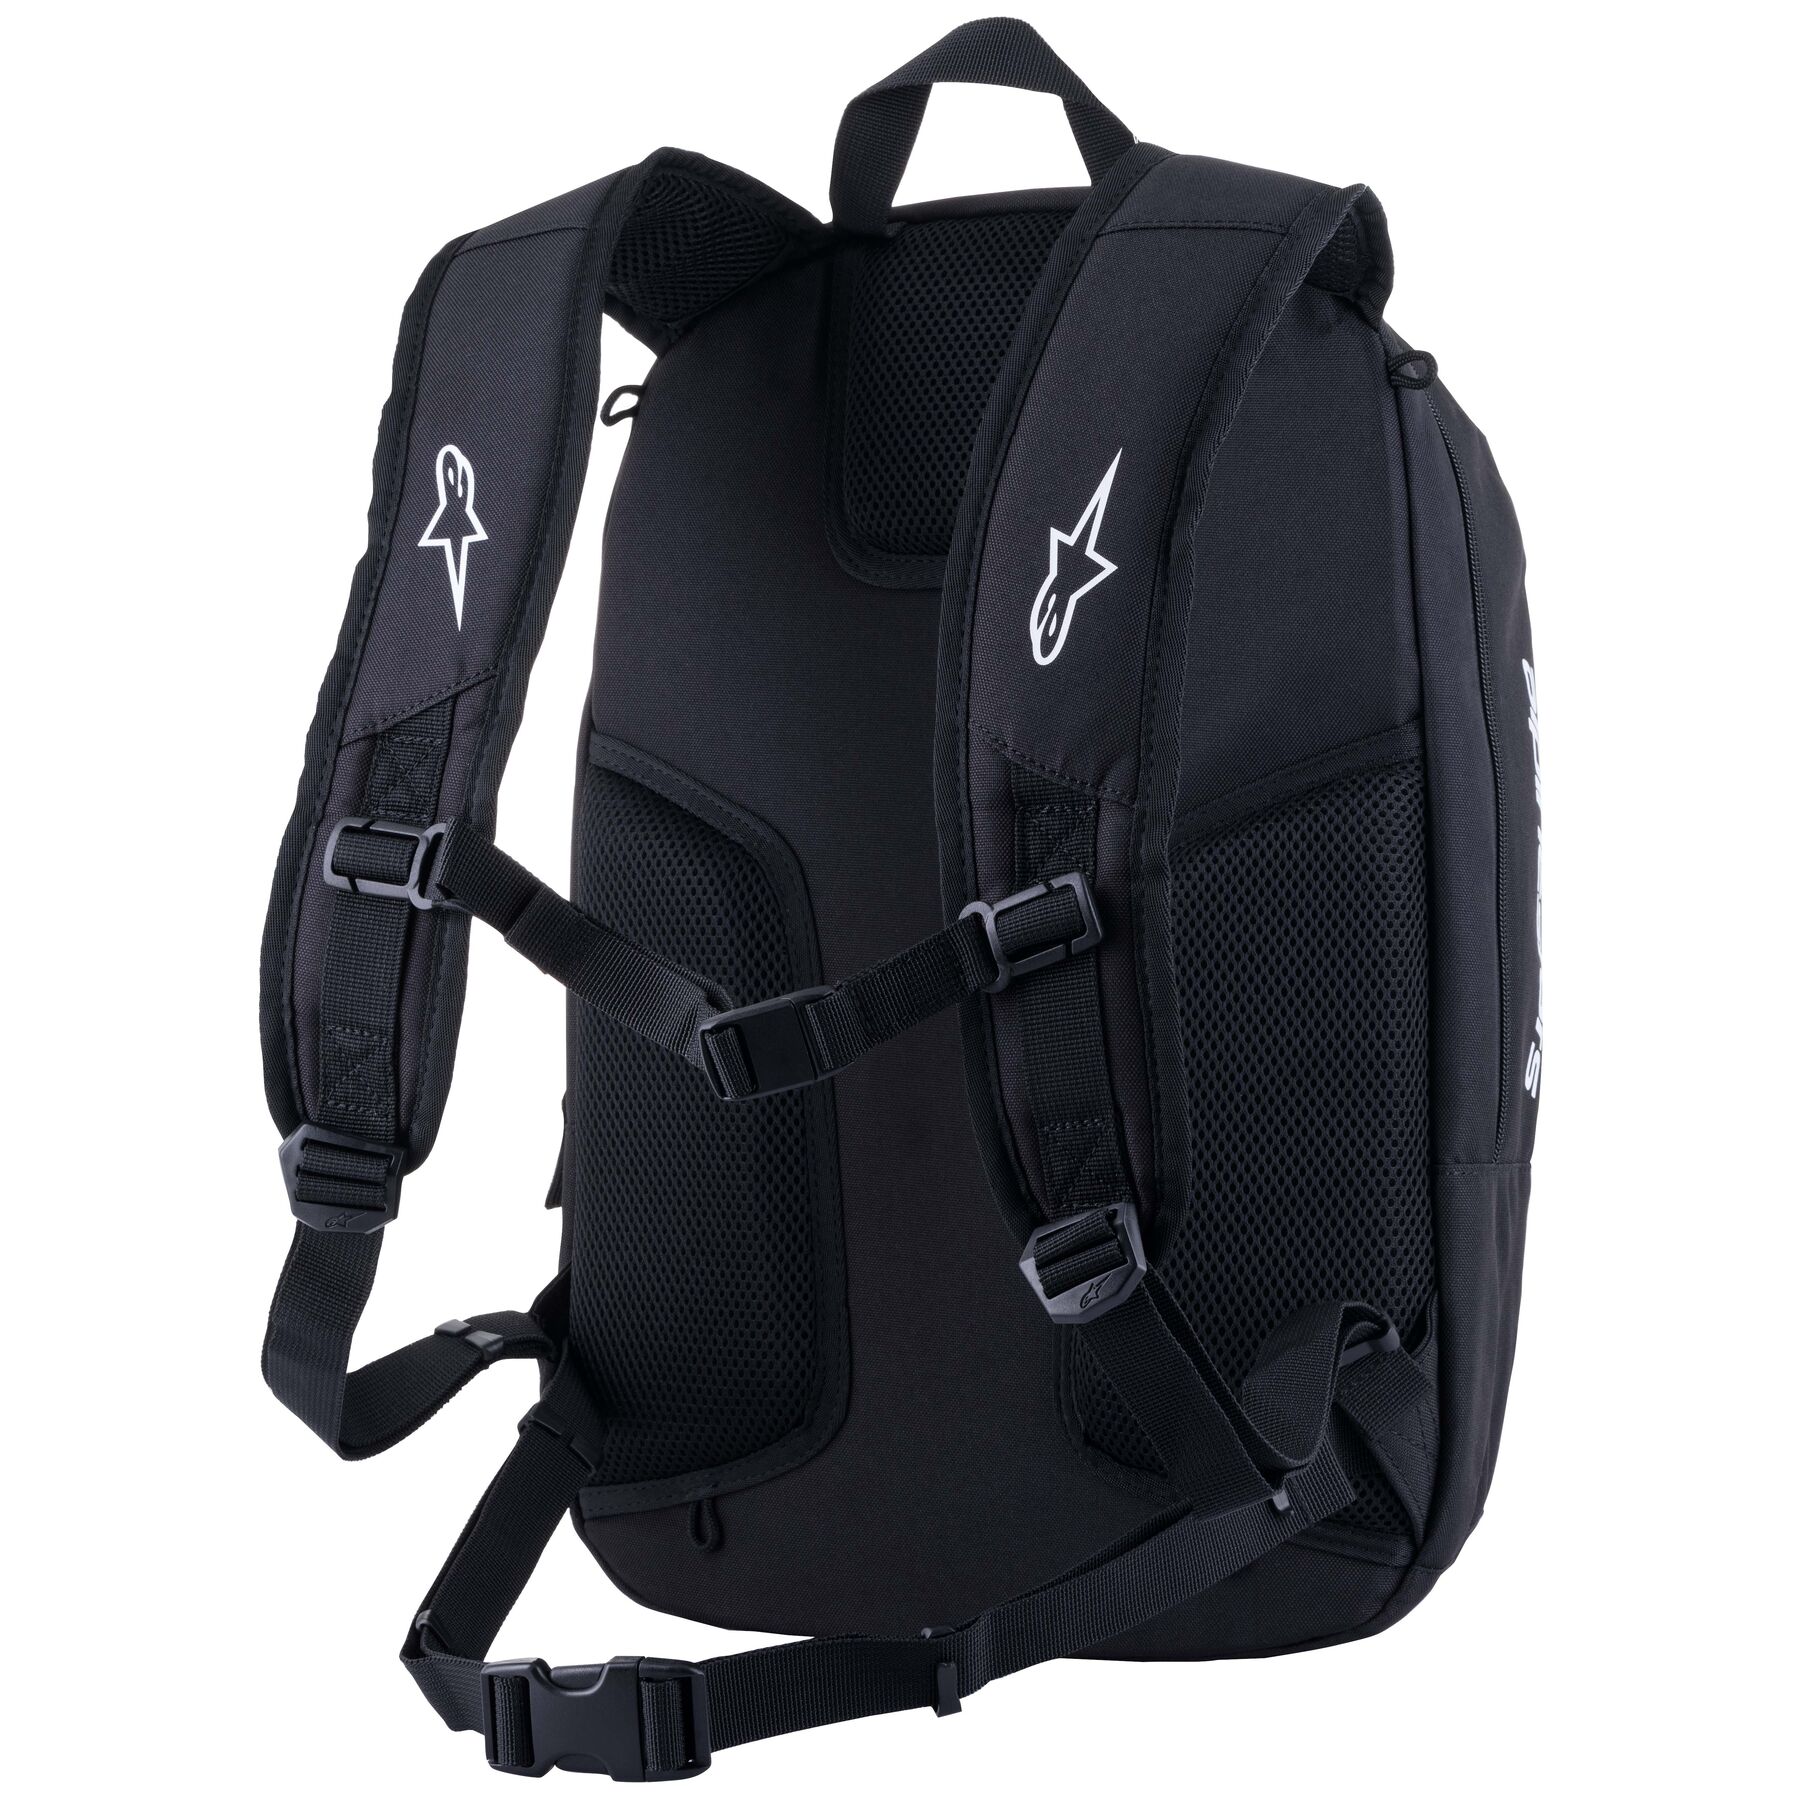 Anti Theft Waterproof Backpack With USB Port | The Store Bags